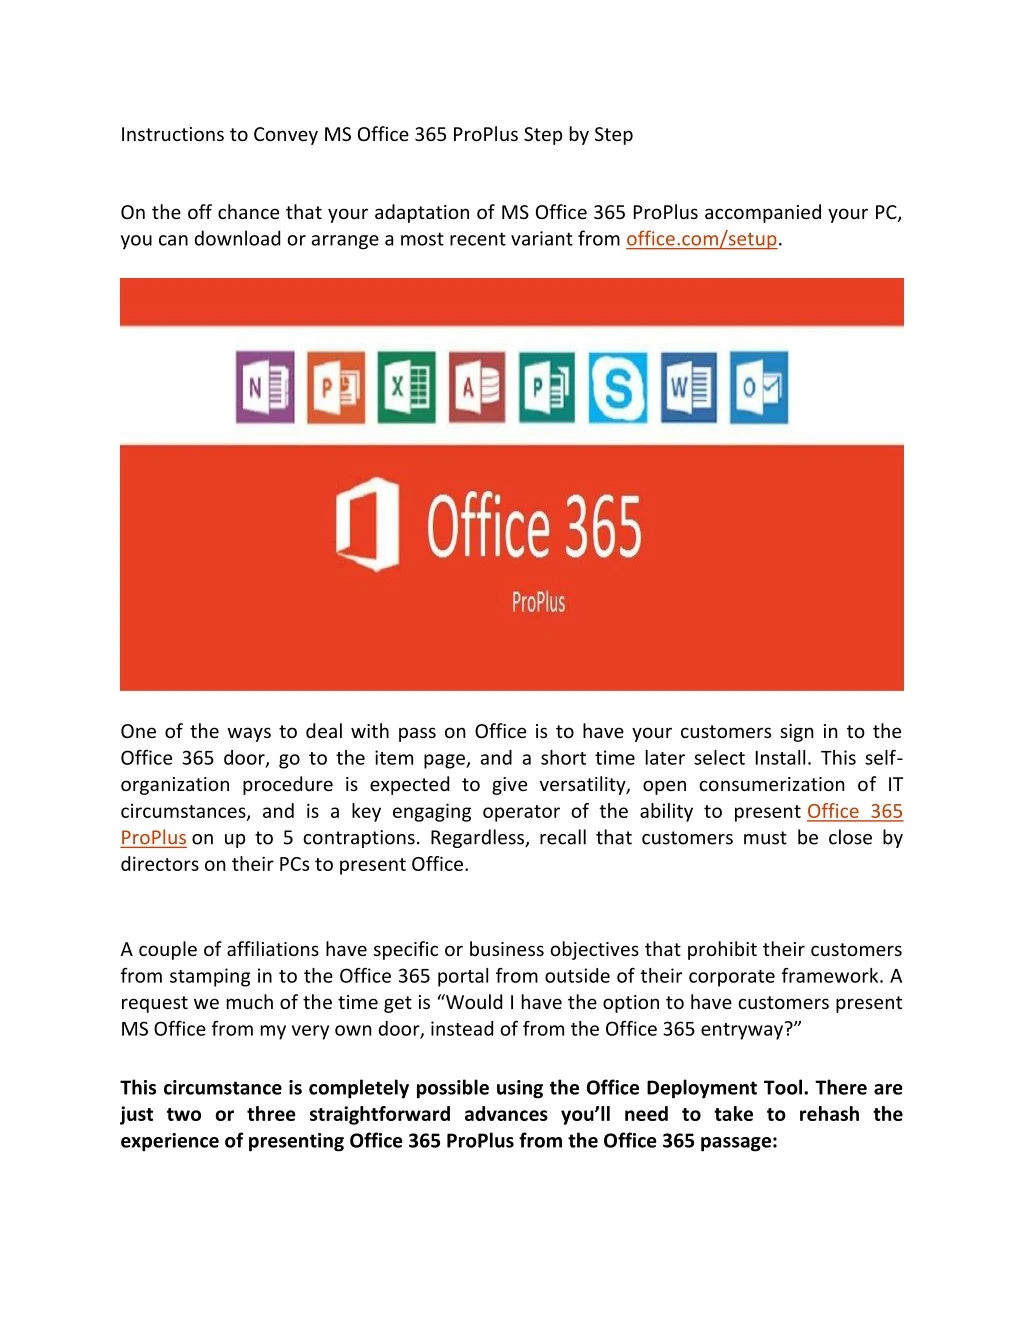 instructions to convey ms office 365 proplus step